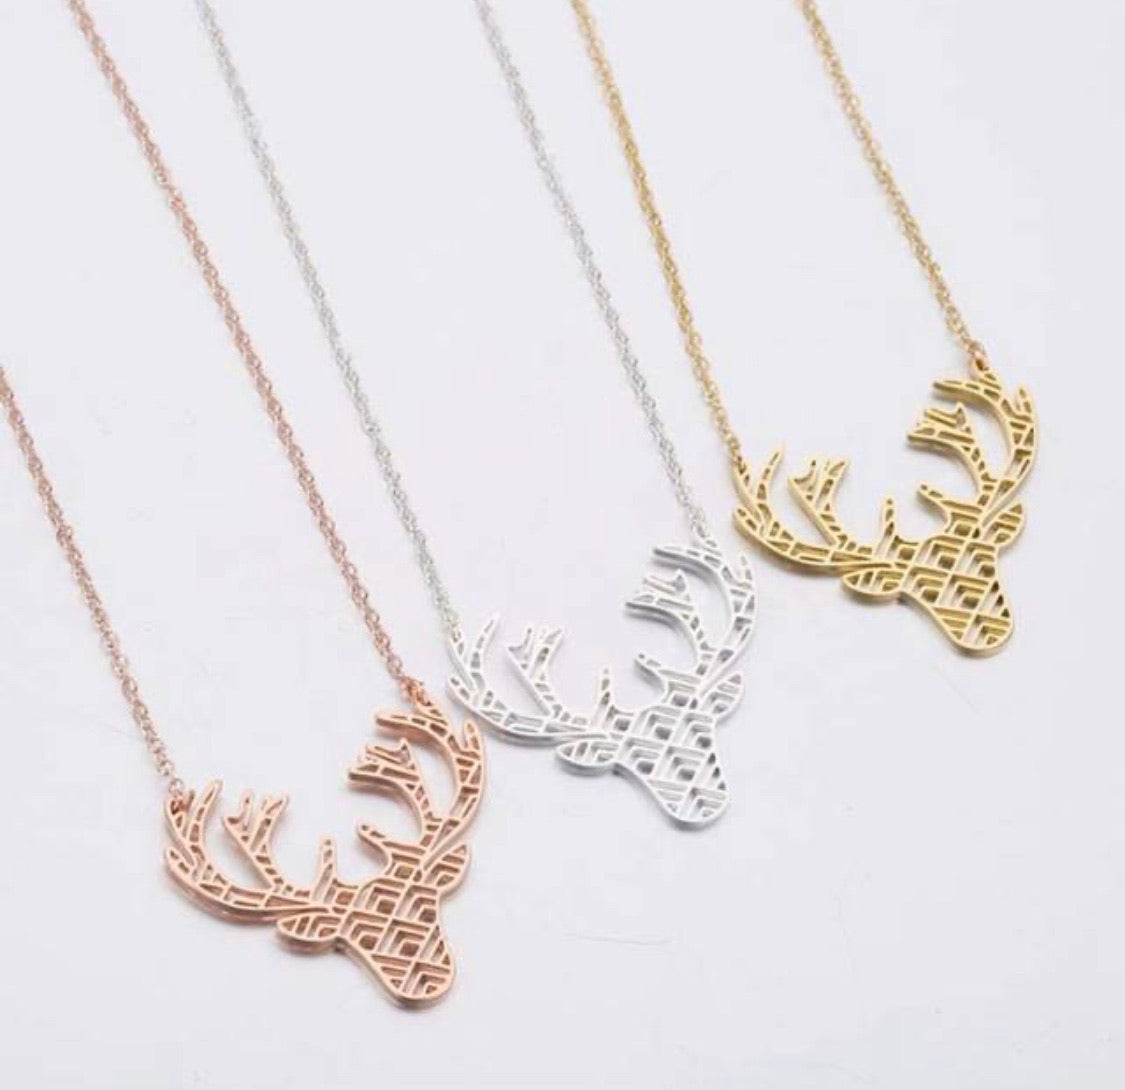 Necklace { Deer } Antlers. Silver. Gold. Rose gold. - Stacy's Pink Martini Boutique